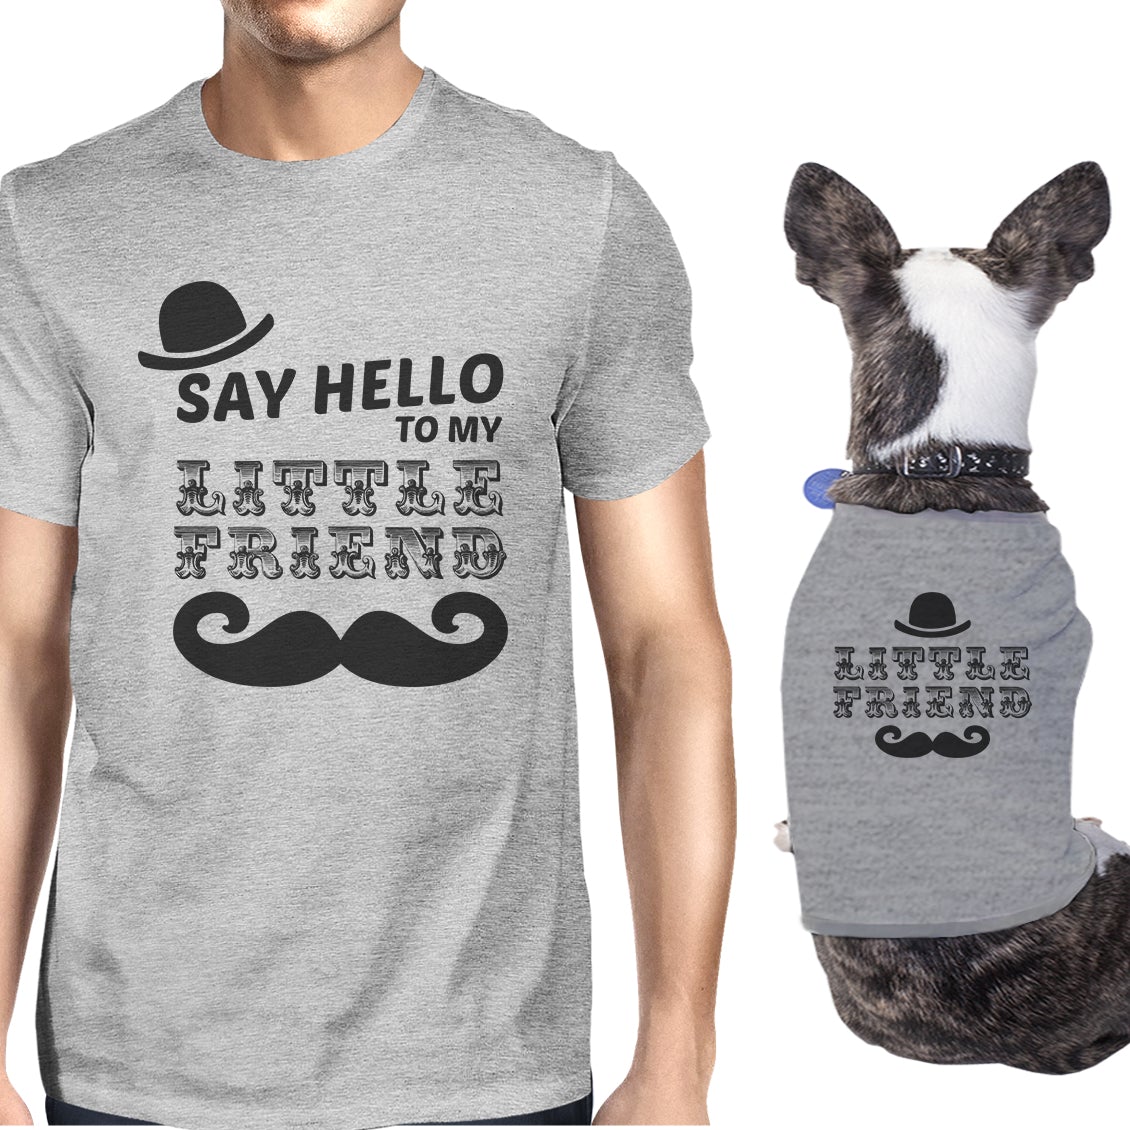 Say Hello To My Little Friend Mustache Owner and Pet Matching Grey Shirts